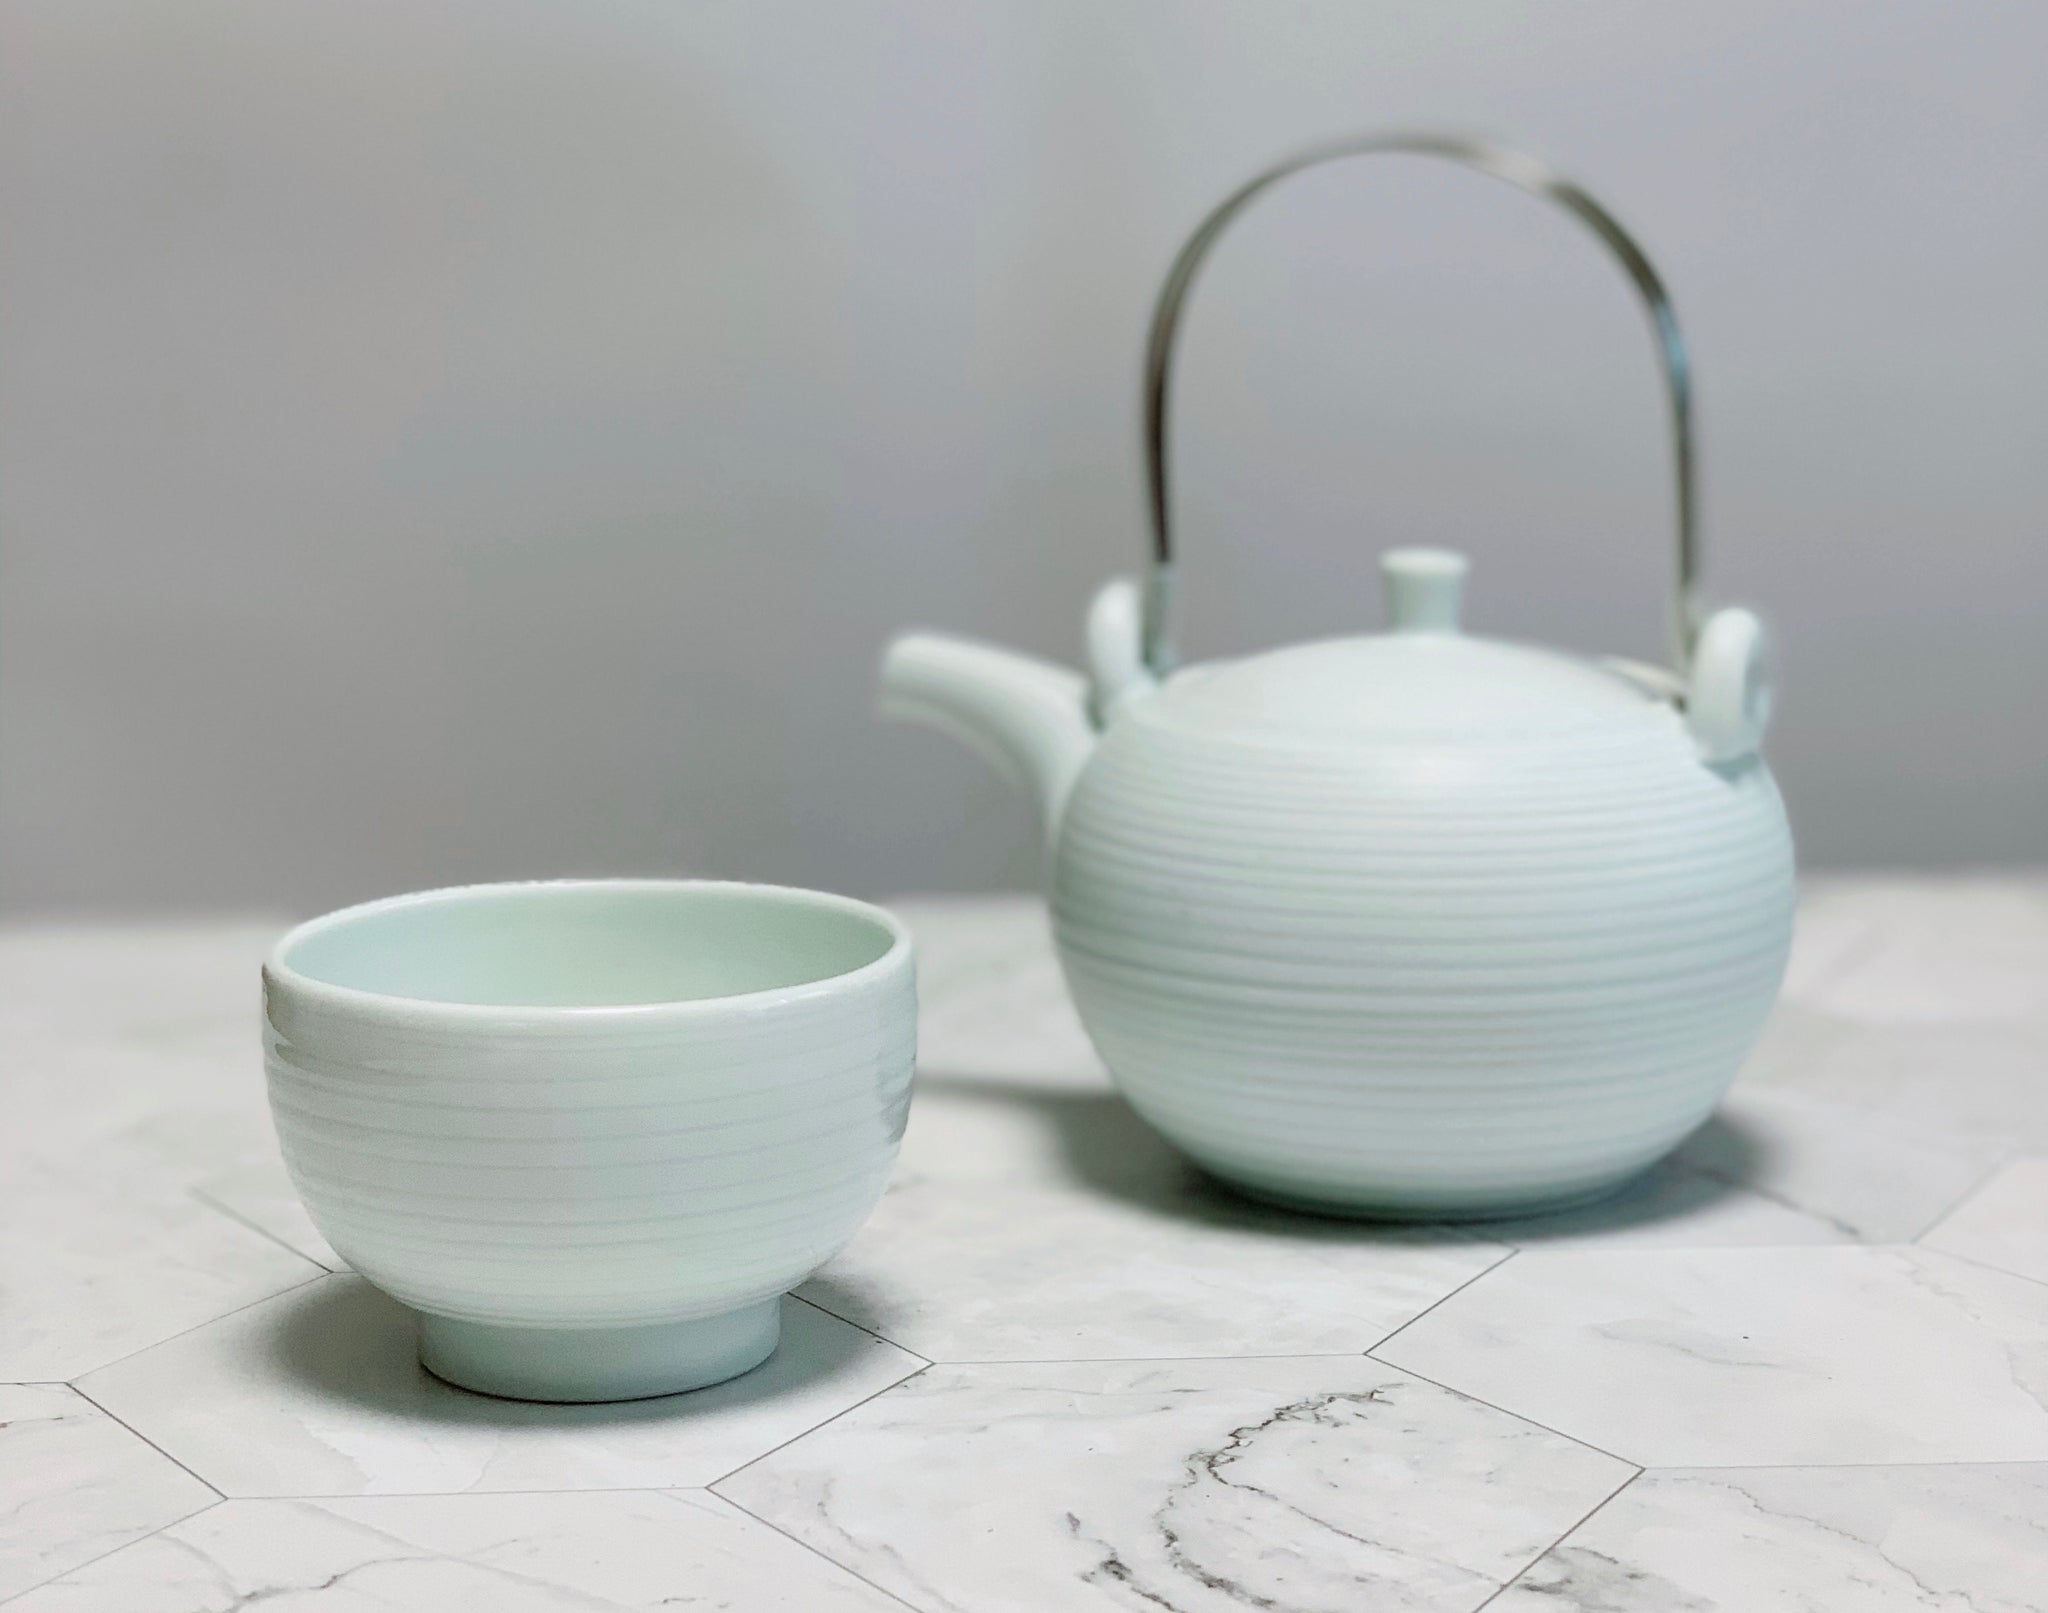 How to Choose a Suitable Kyusu (Japanese Tea Pot) by Tea Leaf Types